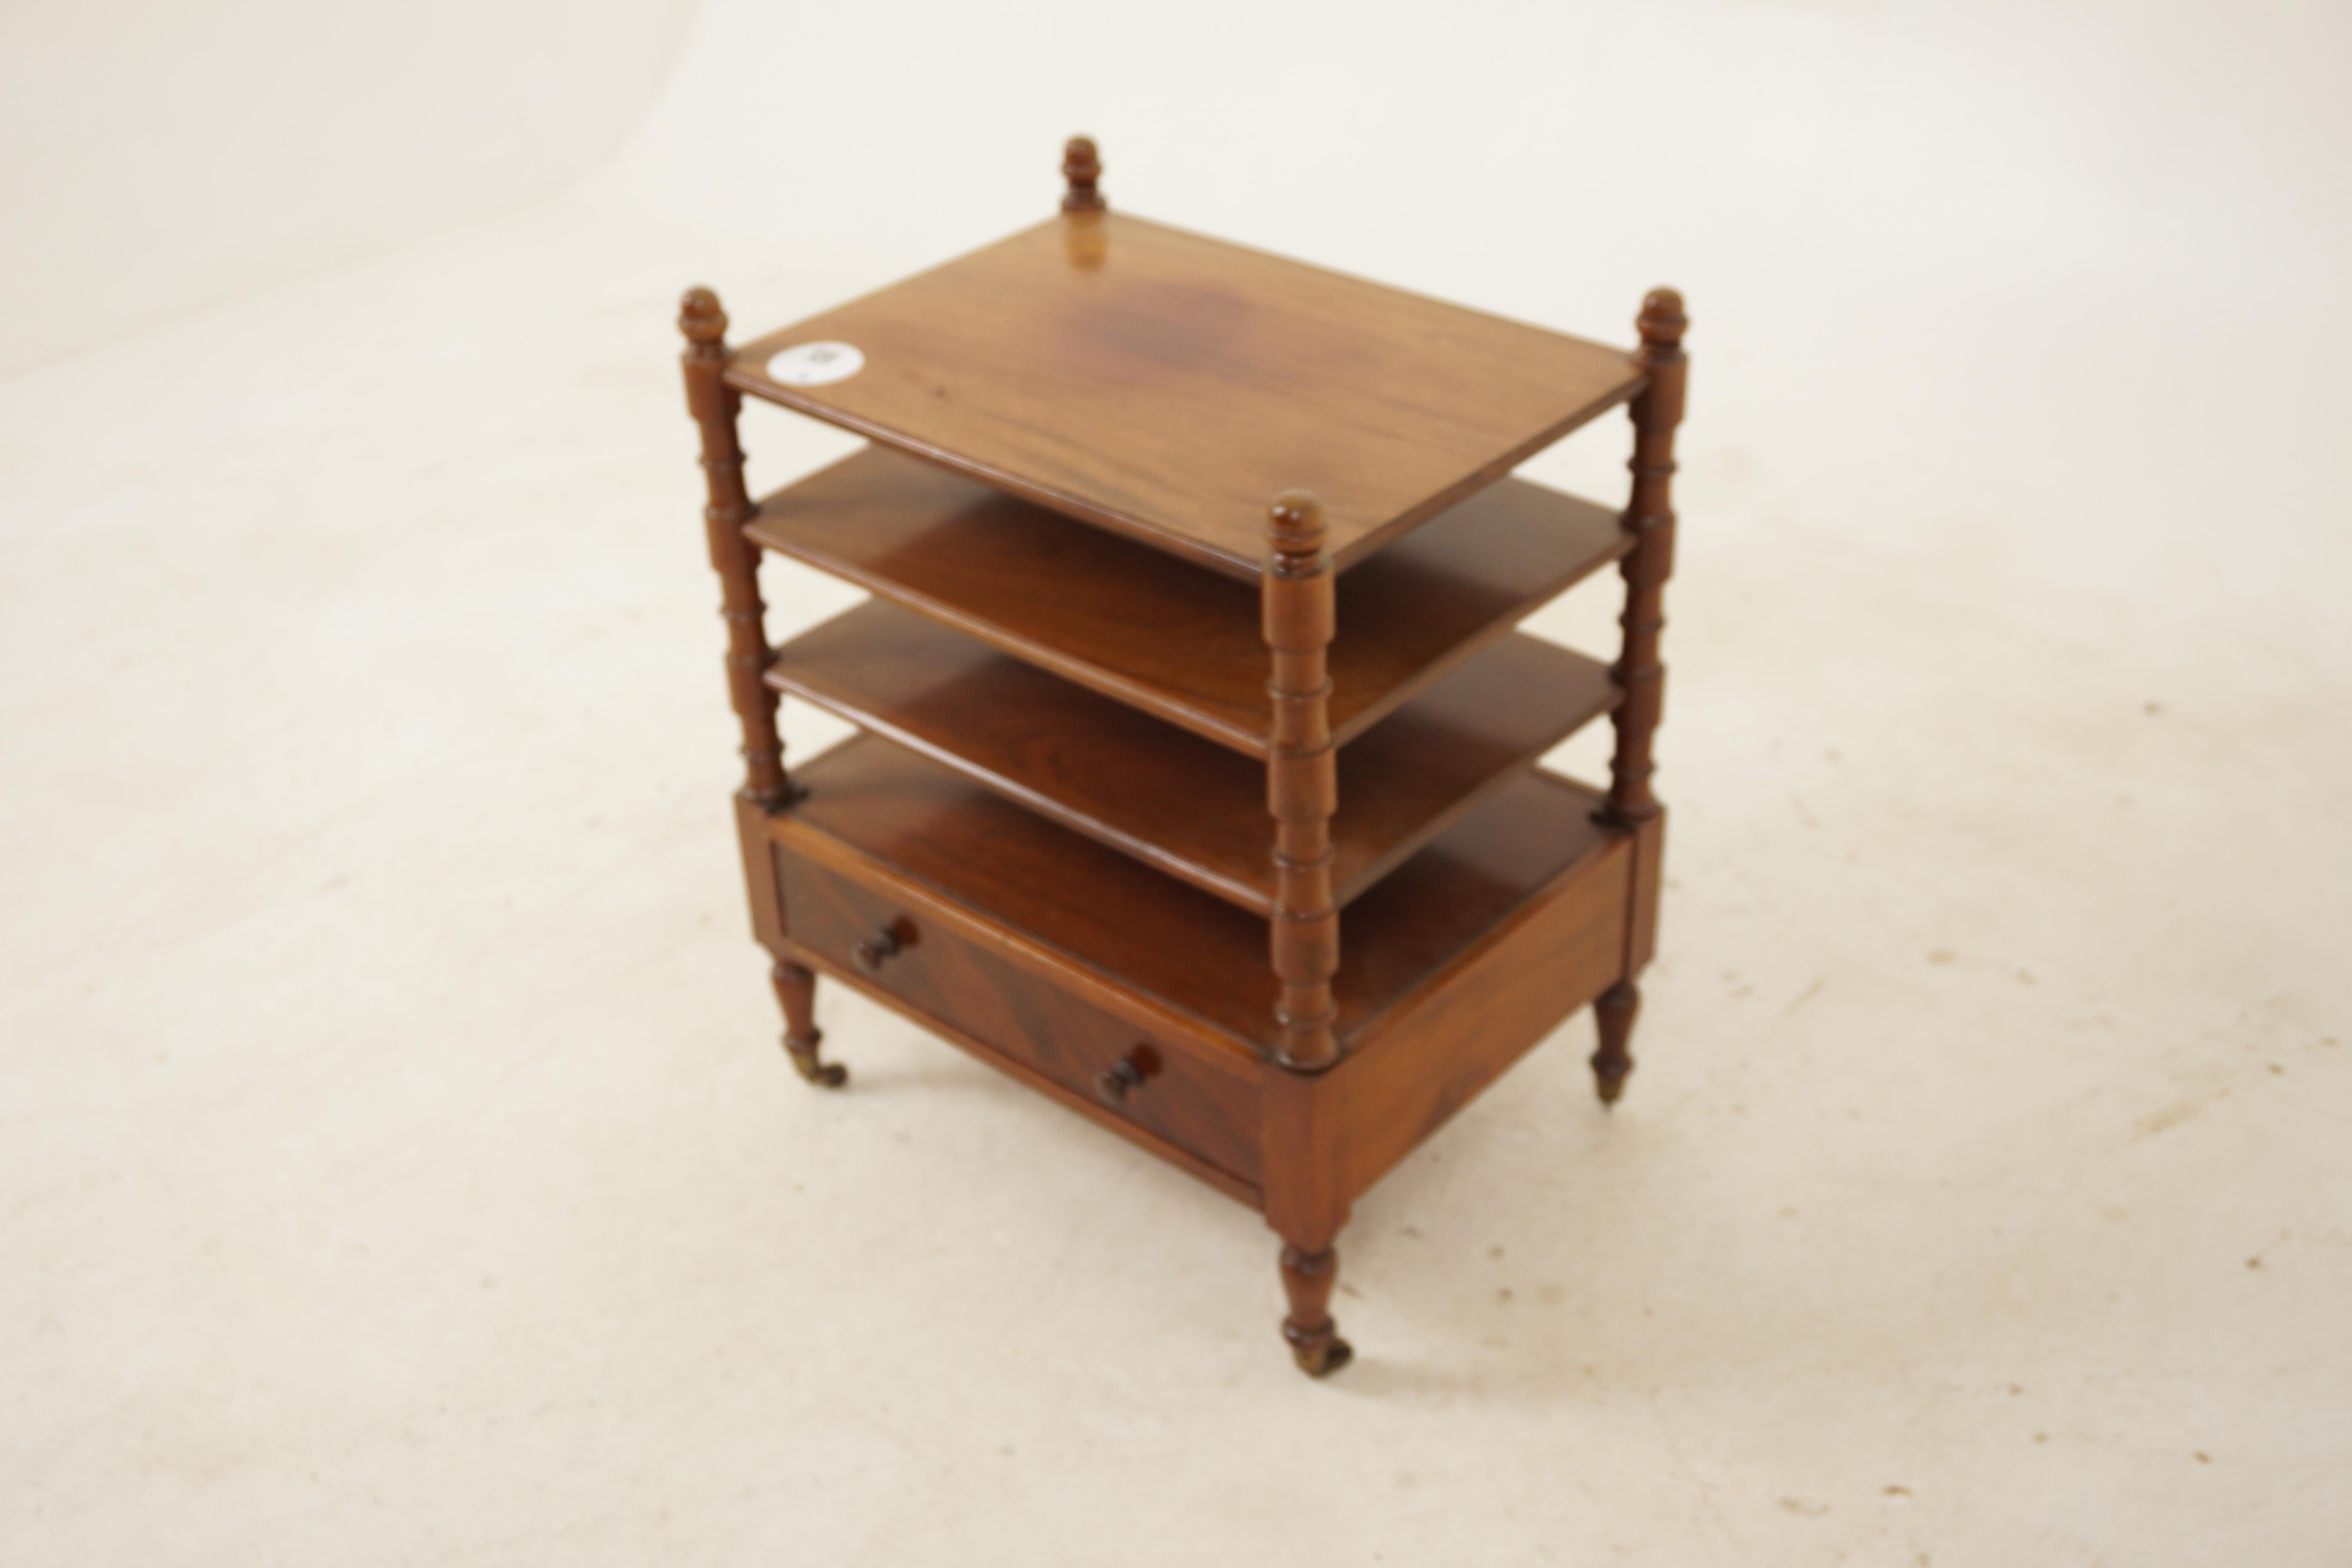 Antique walnut 3 tiered end table with drawer, Scotland 1890, H927

Scotland 1890
Solid Walnut
Original Finish
Rectangular top with four turned supports on each corner
Single dovetailed drawers below
All standing on four short turned legs